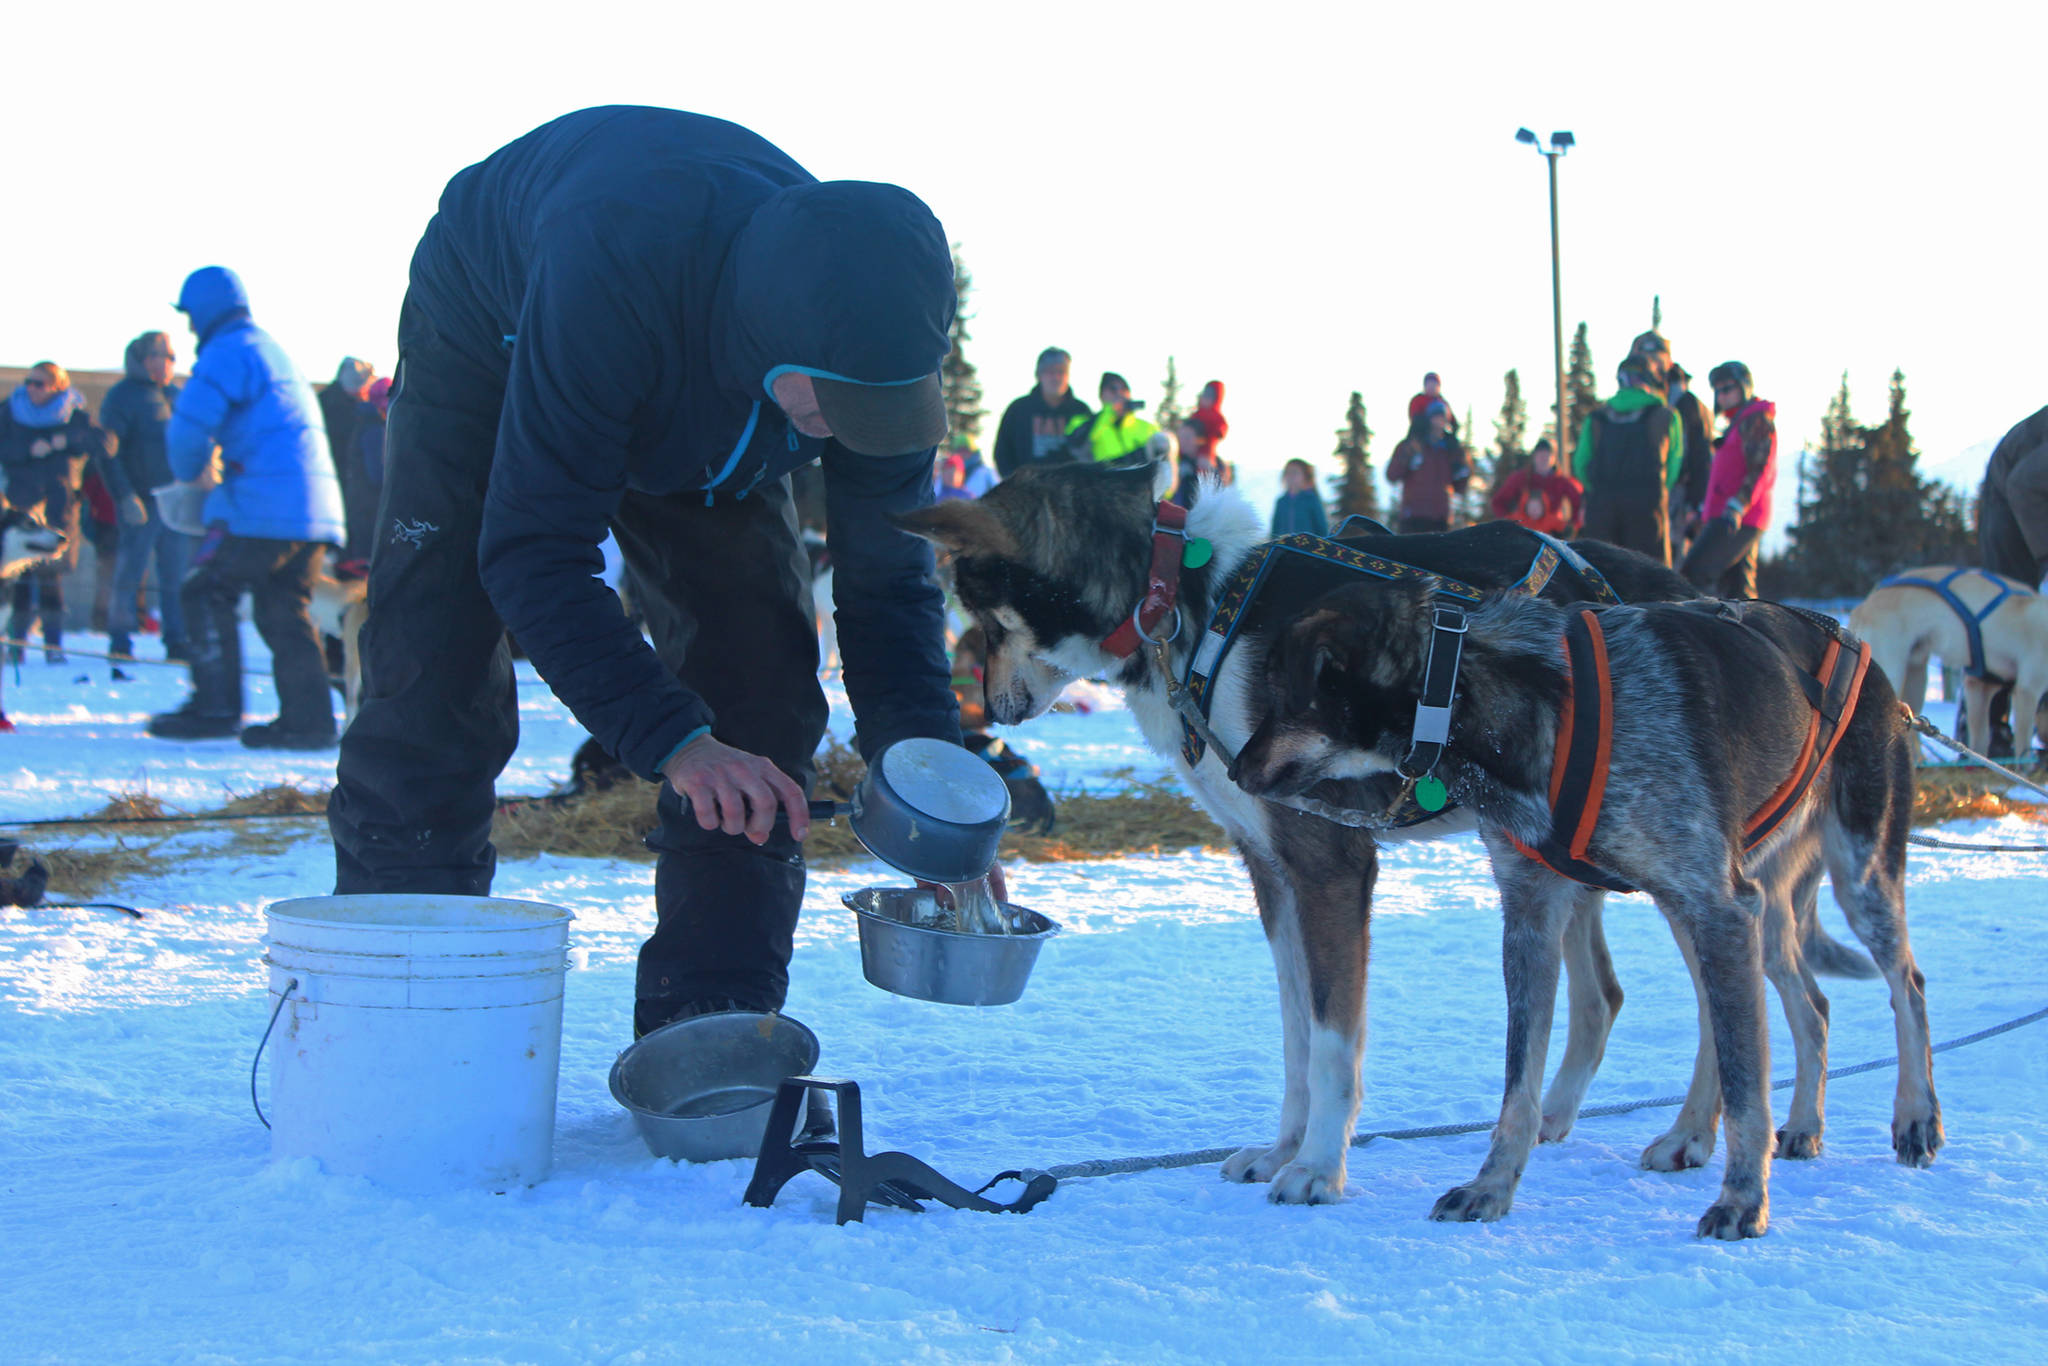 Musher Dave Turner feeds his two lead dogs at the first checkpoint in the Tustumena 200 Sled Dog Race on Saturday, Jan. 27, 2018 at McNeil Canyon Elementary School near Homer, Alaska. (Photo by Megan Pacer/Homer News)